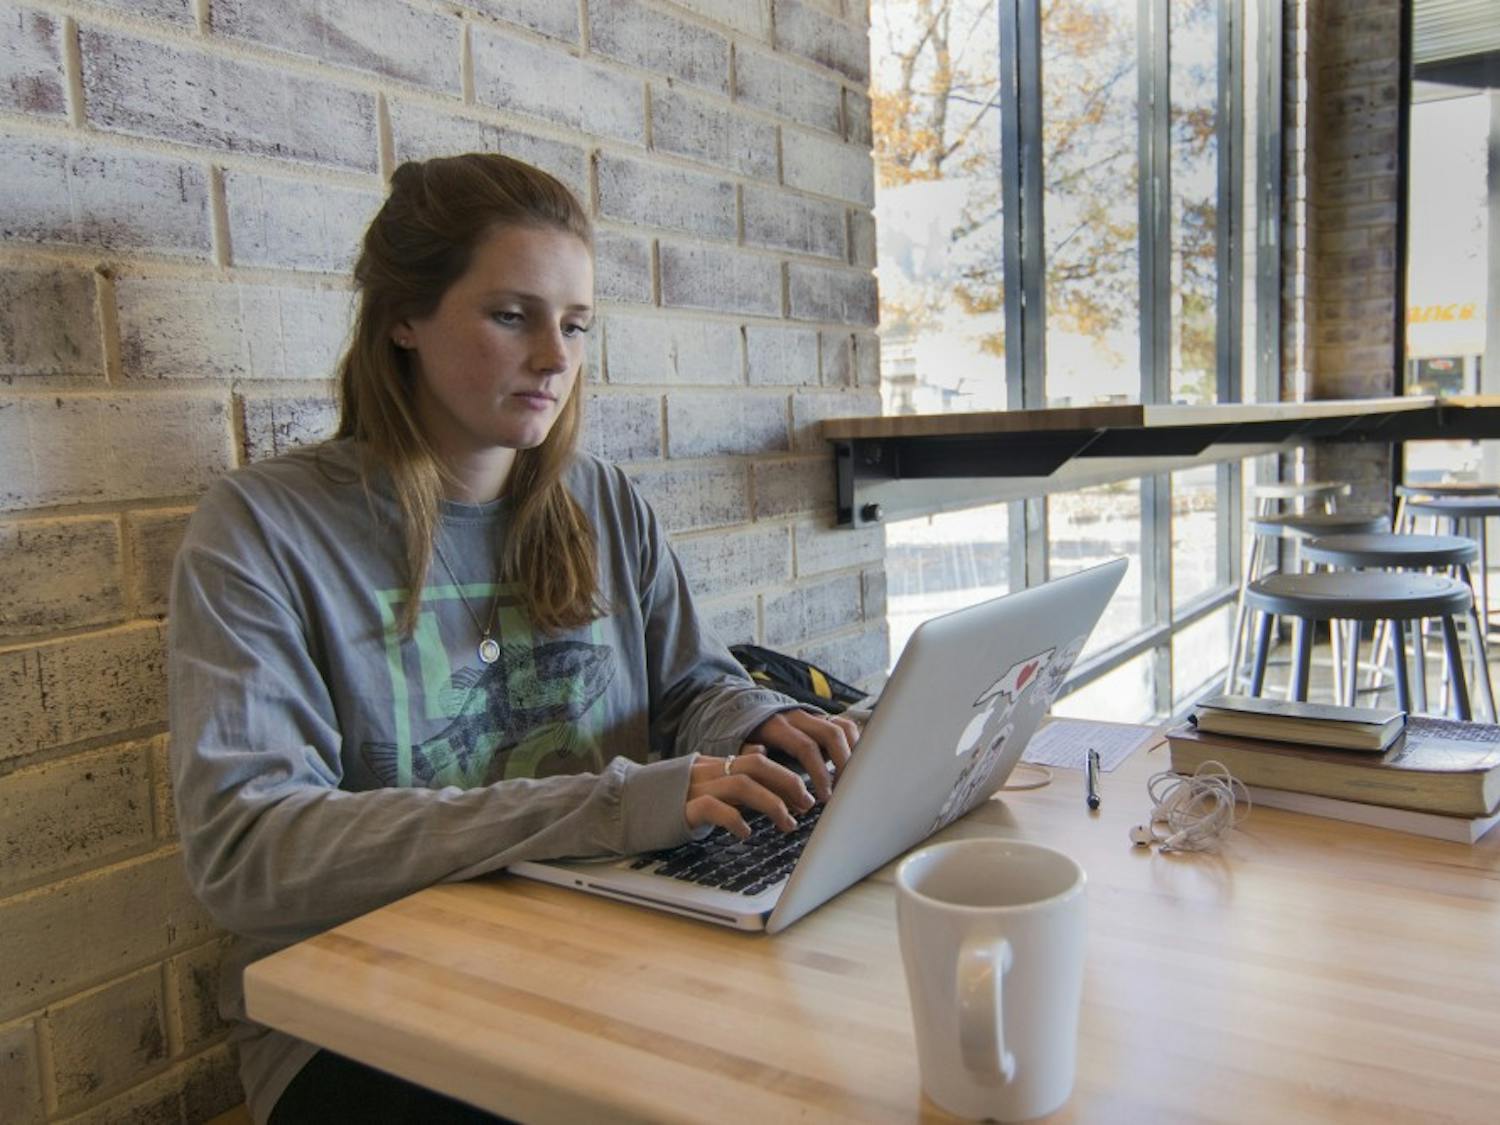 Courtney Beals, senior at UNC, loves to study at Gray Squirrel Coffee. "They have big windows, a lot of natural lights and their coffees are relatively cheap," said Beals.